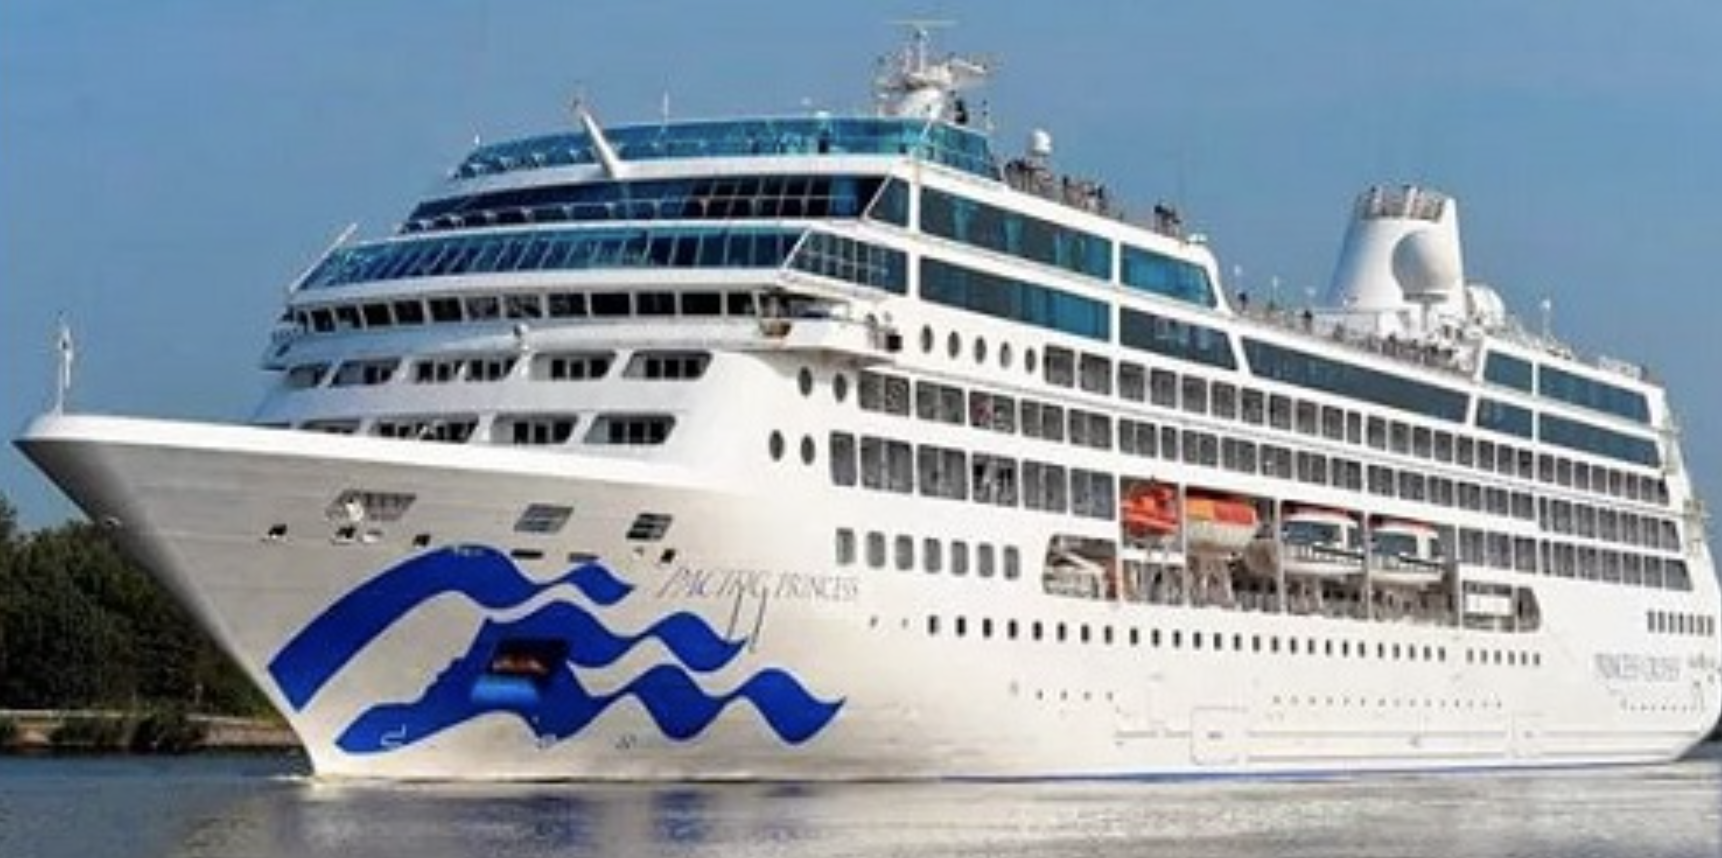 is the pacific princess cruise ship still in service